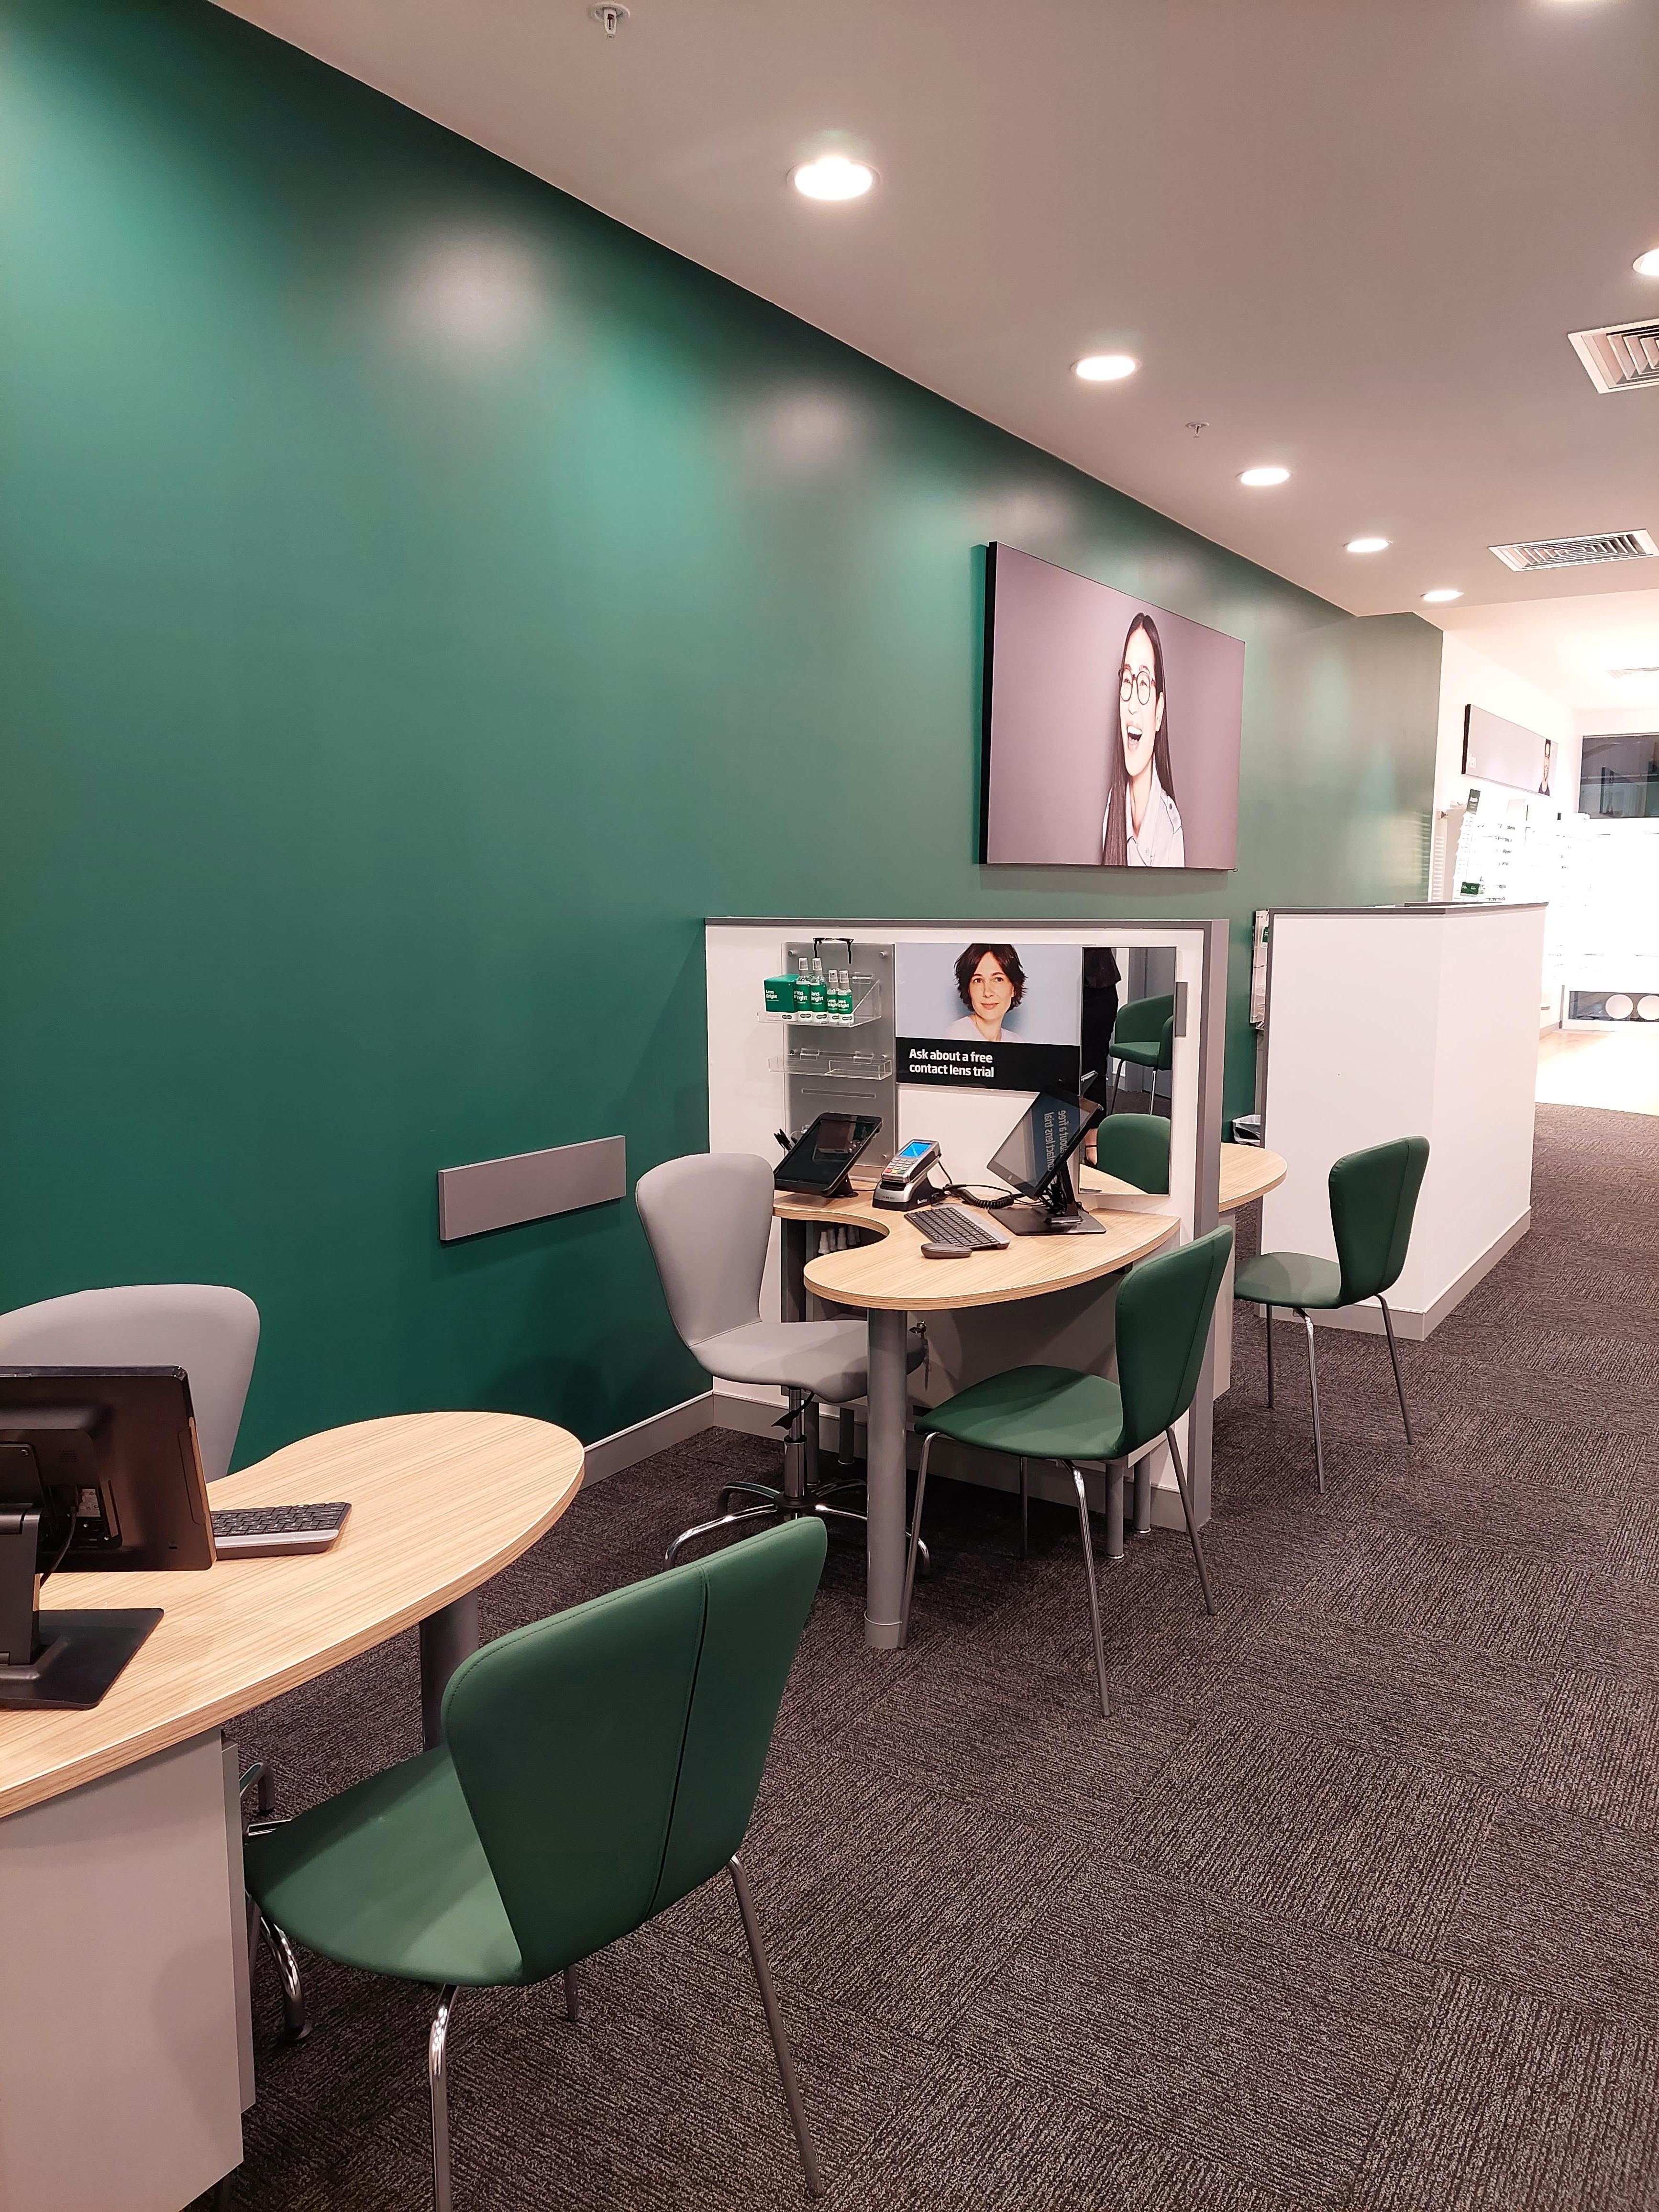 Images Specsavers Optometrists - Morwell